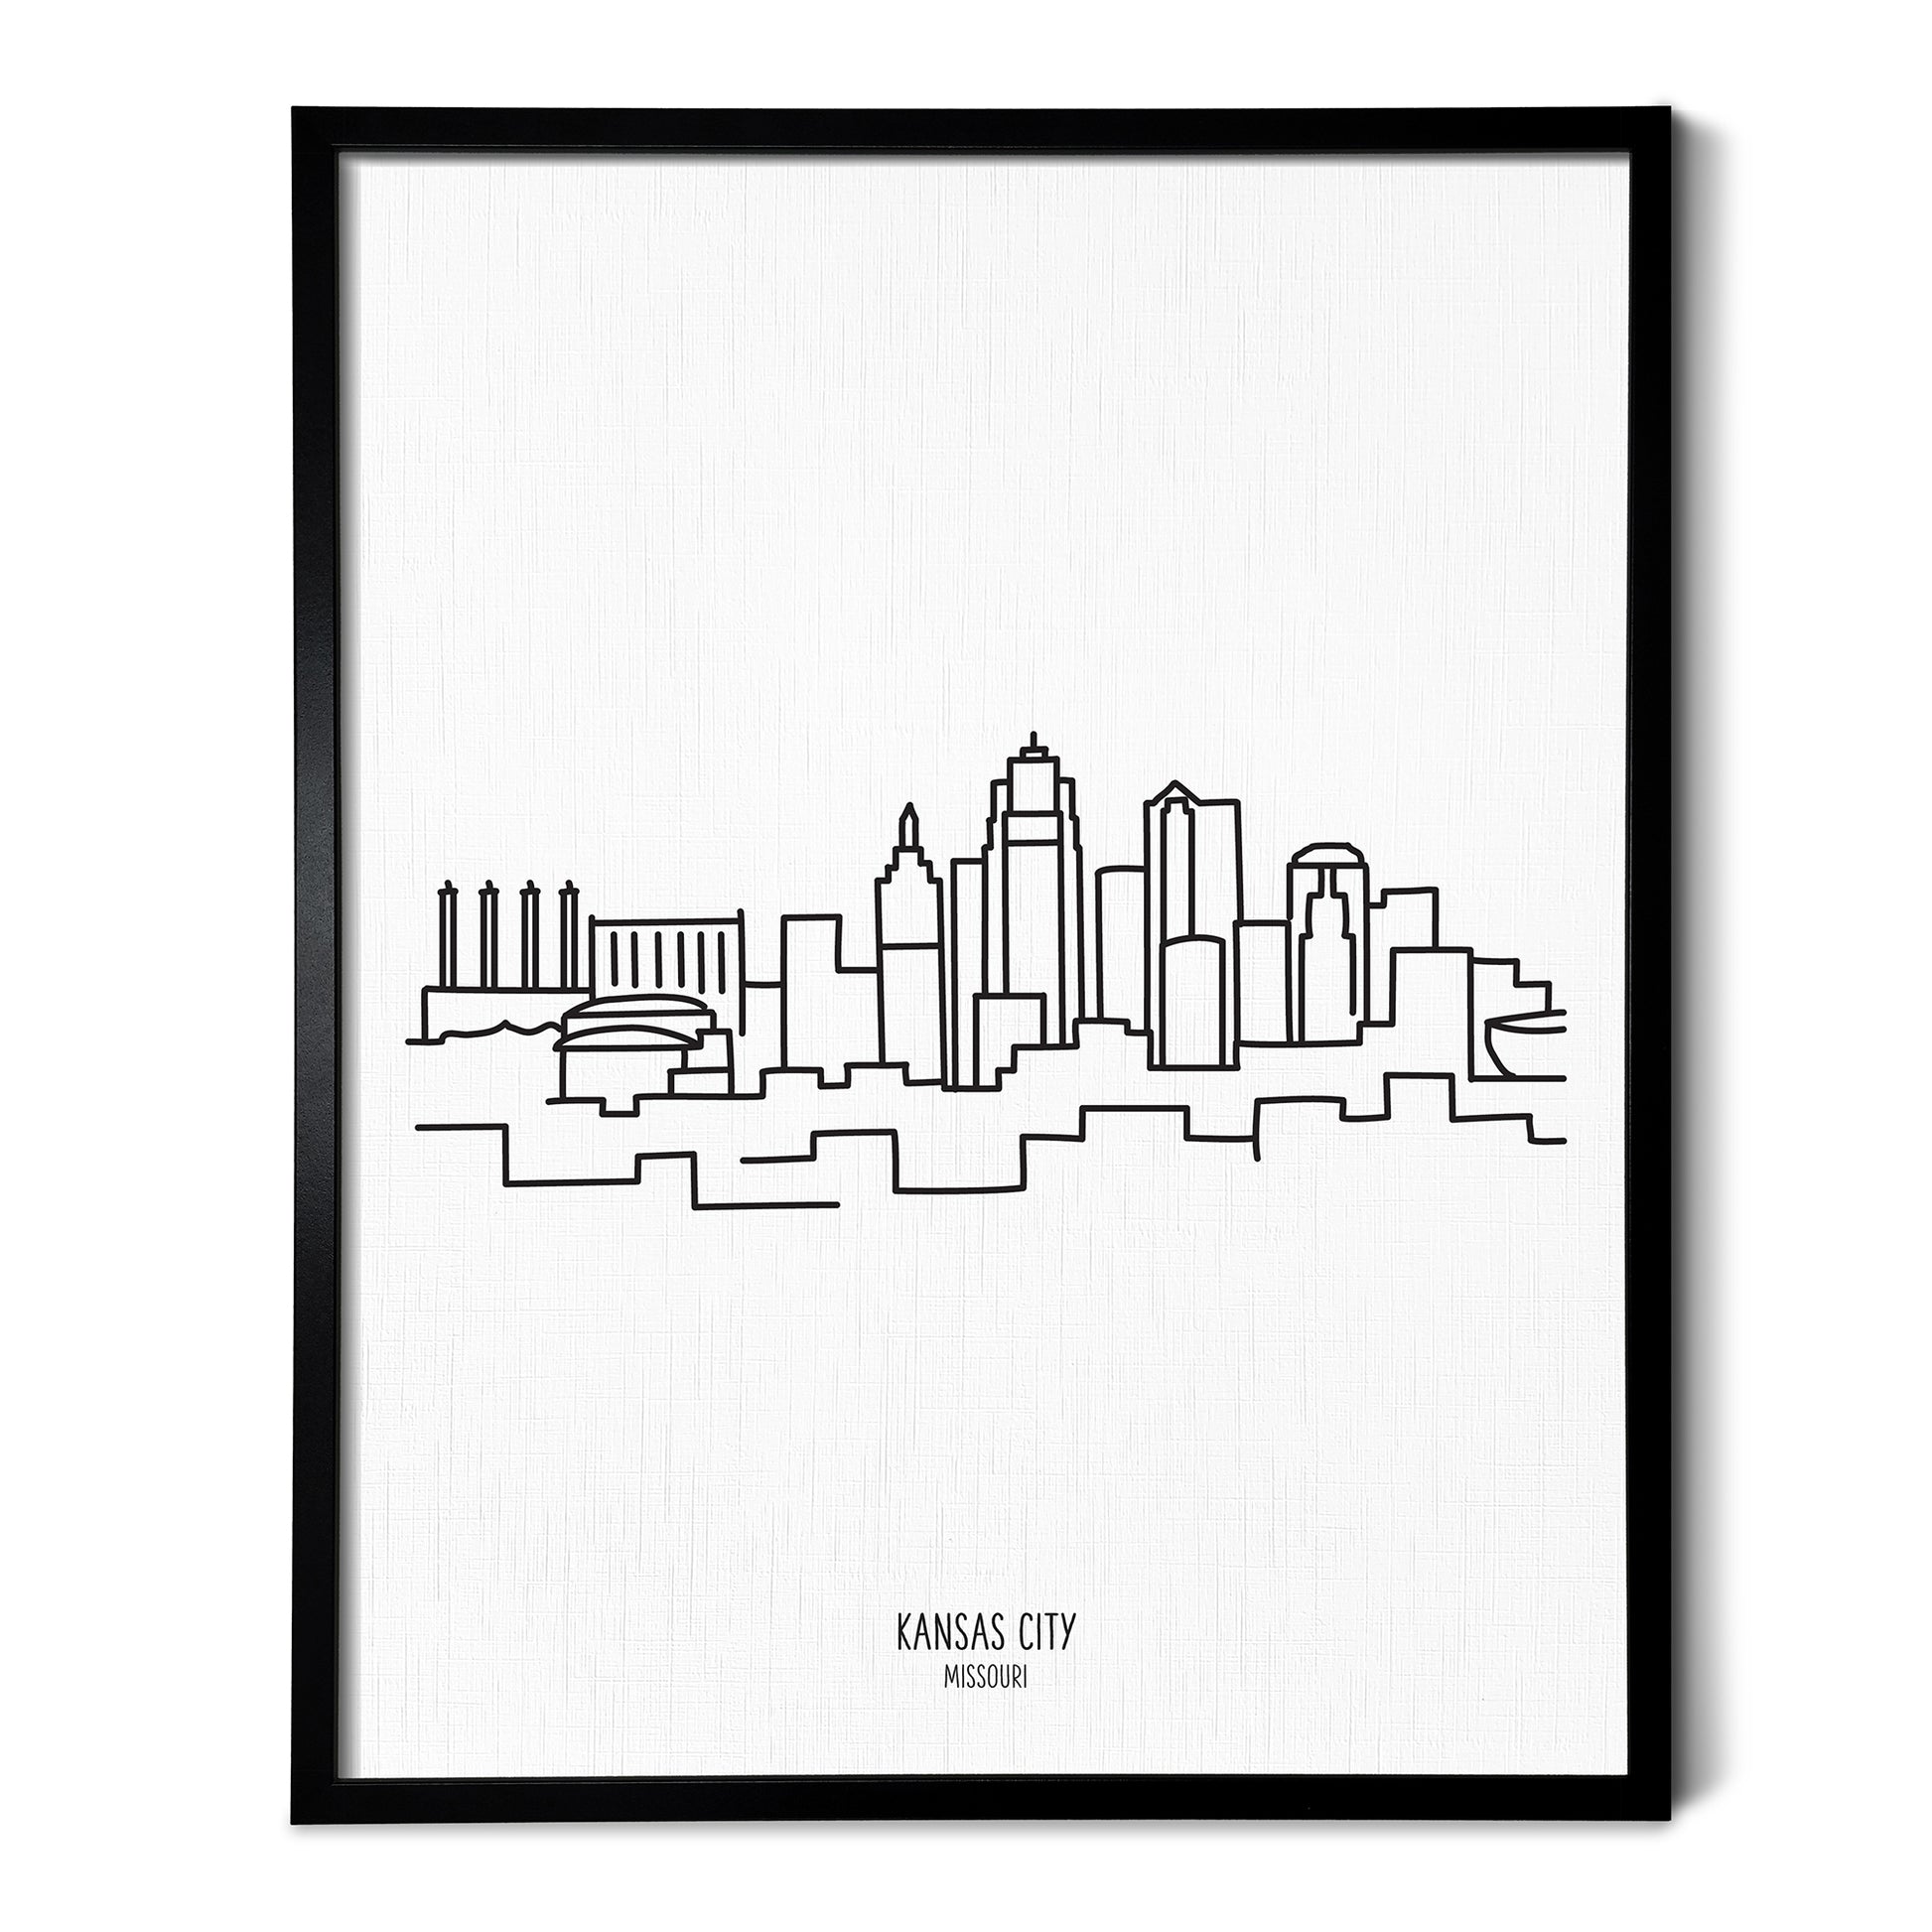 A line art drawing of the Kansas City Missouri Skyline on white linen paper in a thin black picture frame